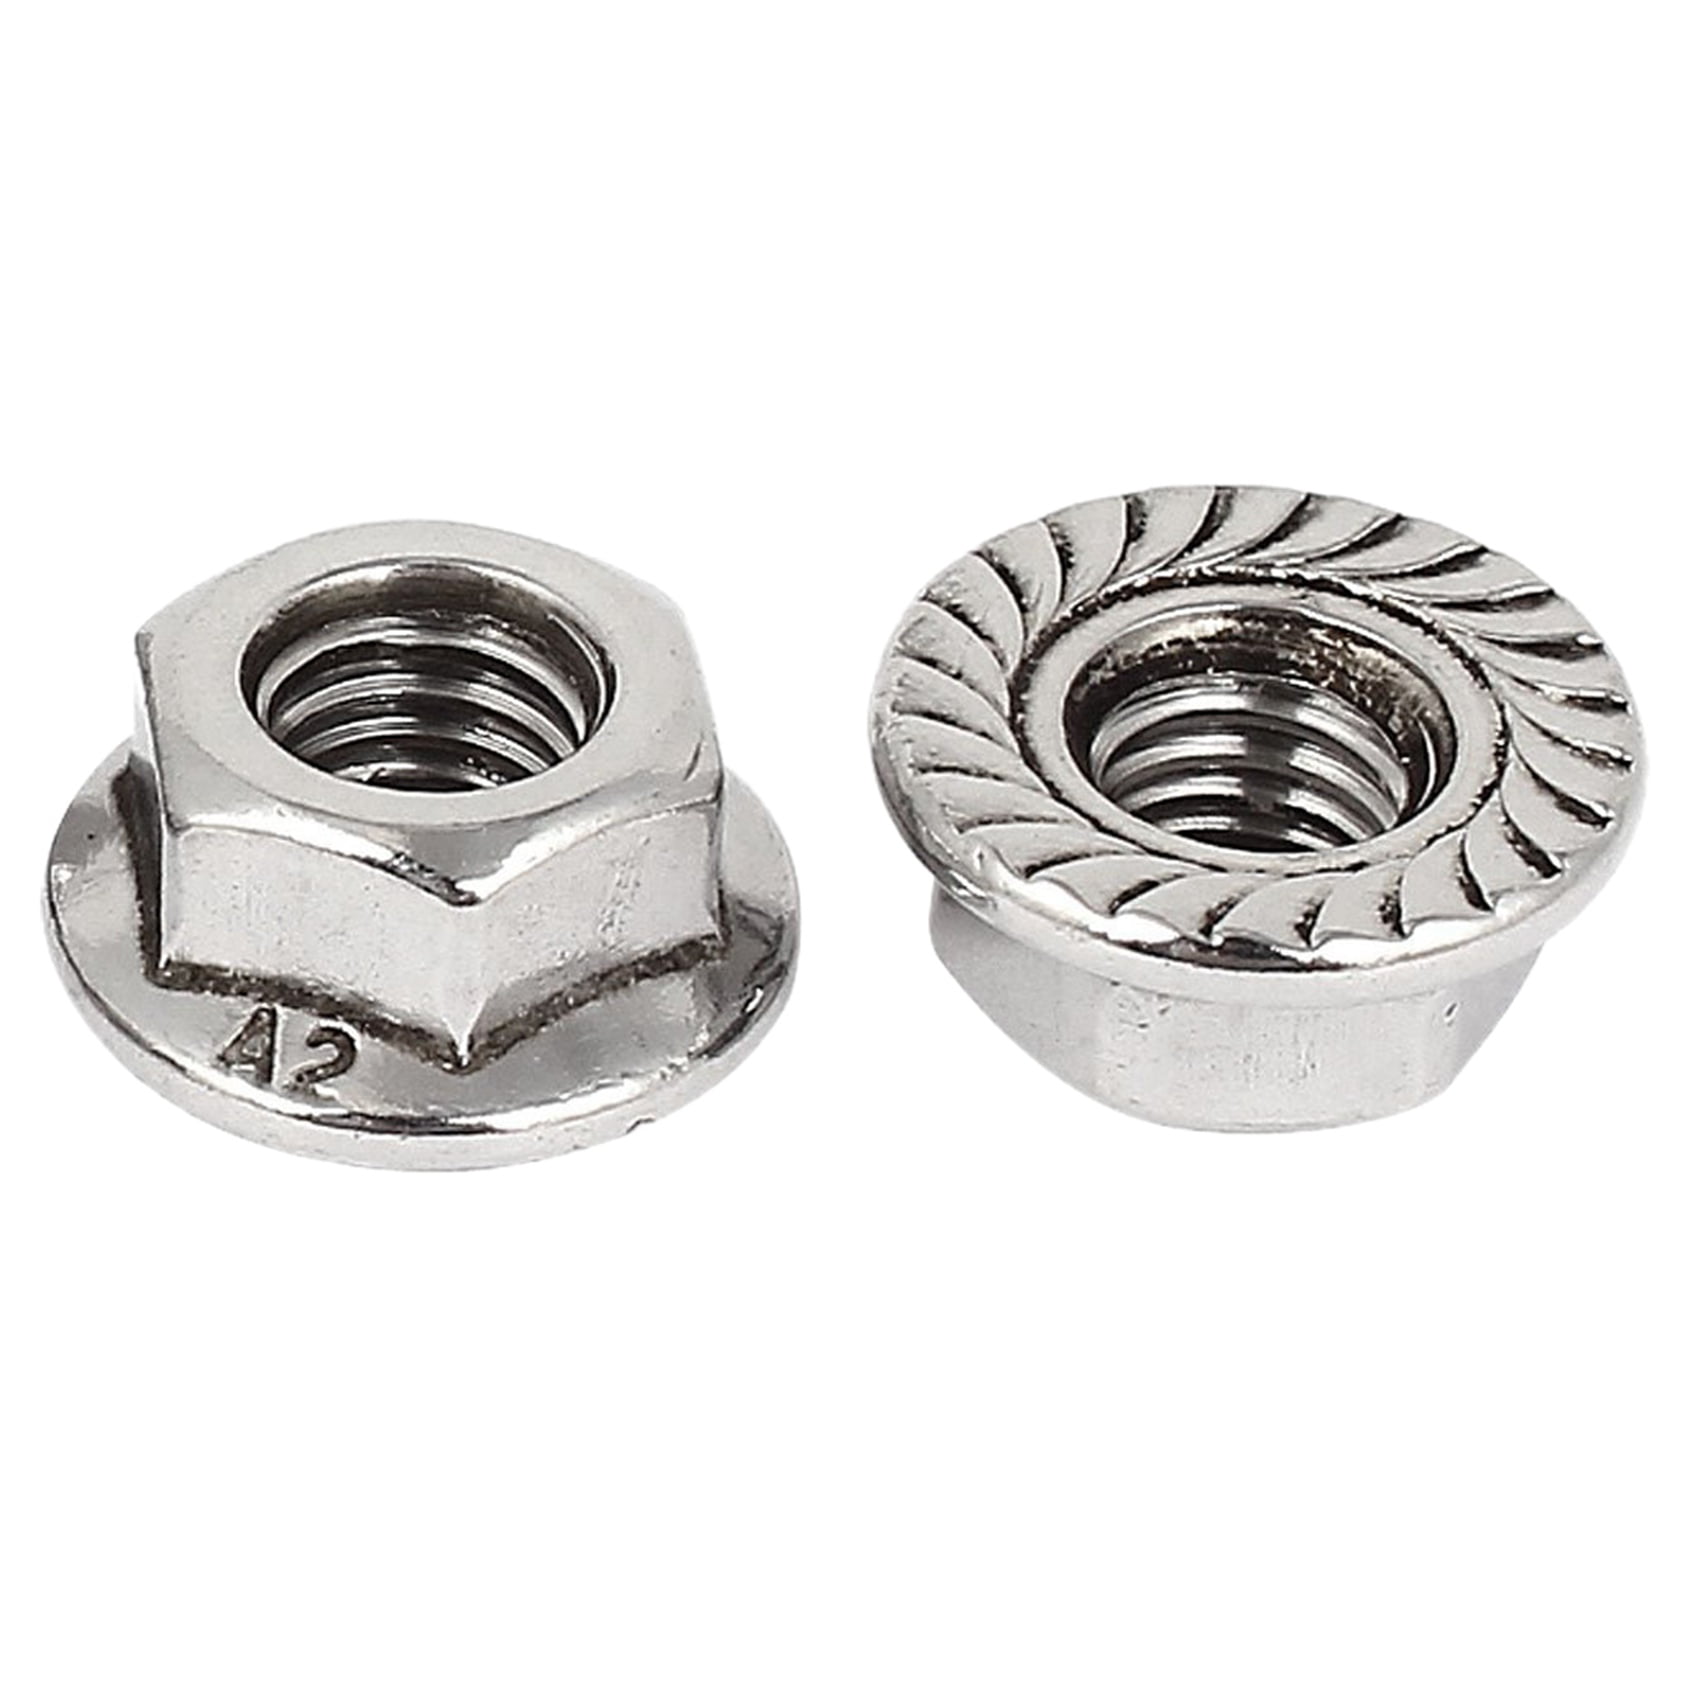 Sizes 6-32 to 1/2" Type 18-8 Stainless Steel Serrated Flange Nuts 